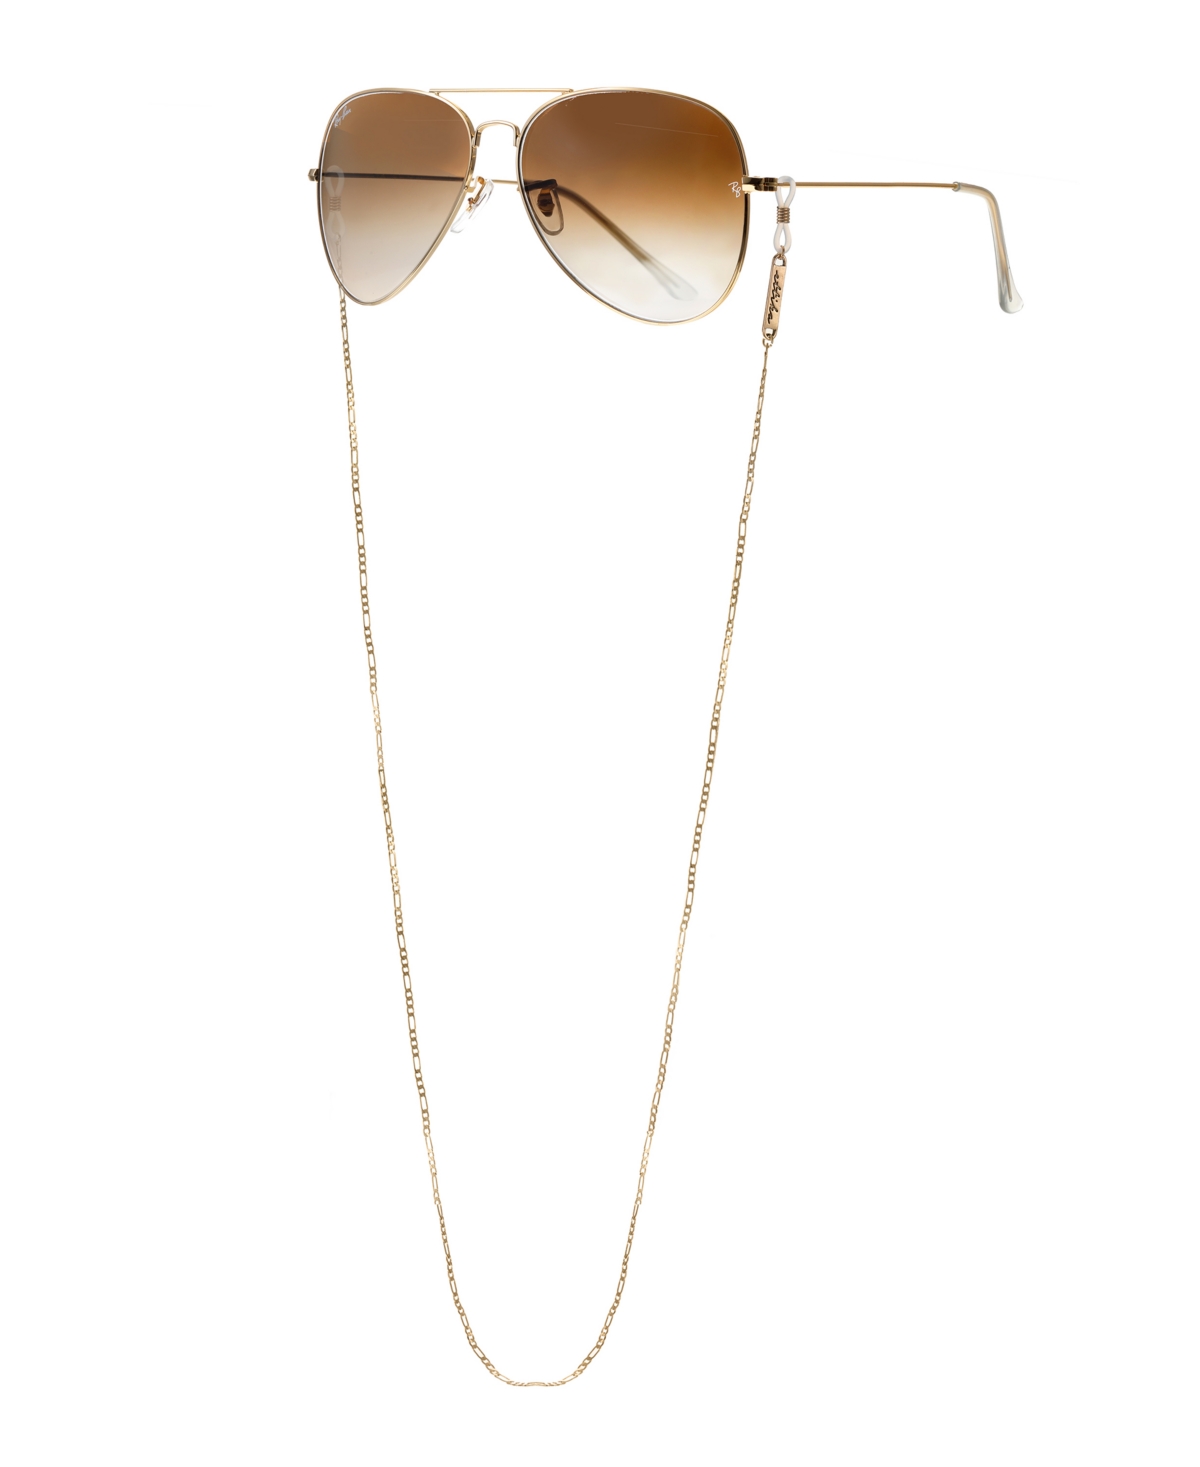 Women's 18k Gold Plated Go-to Glasses Chain - Gold-Plated